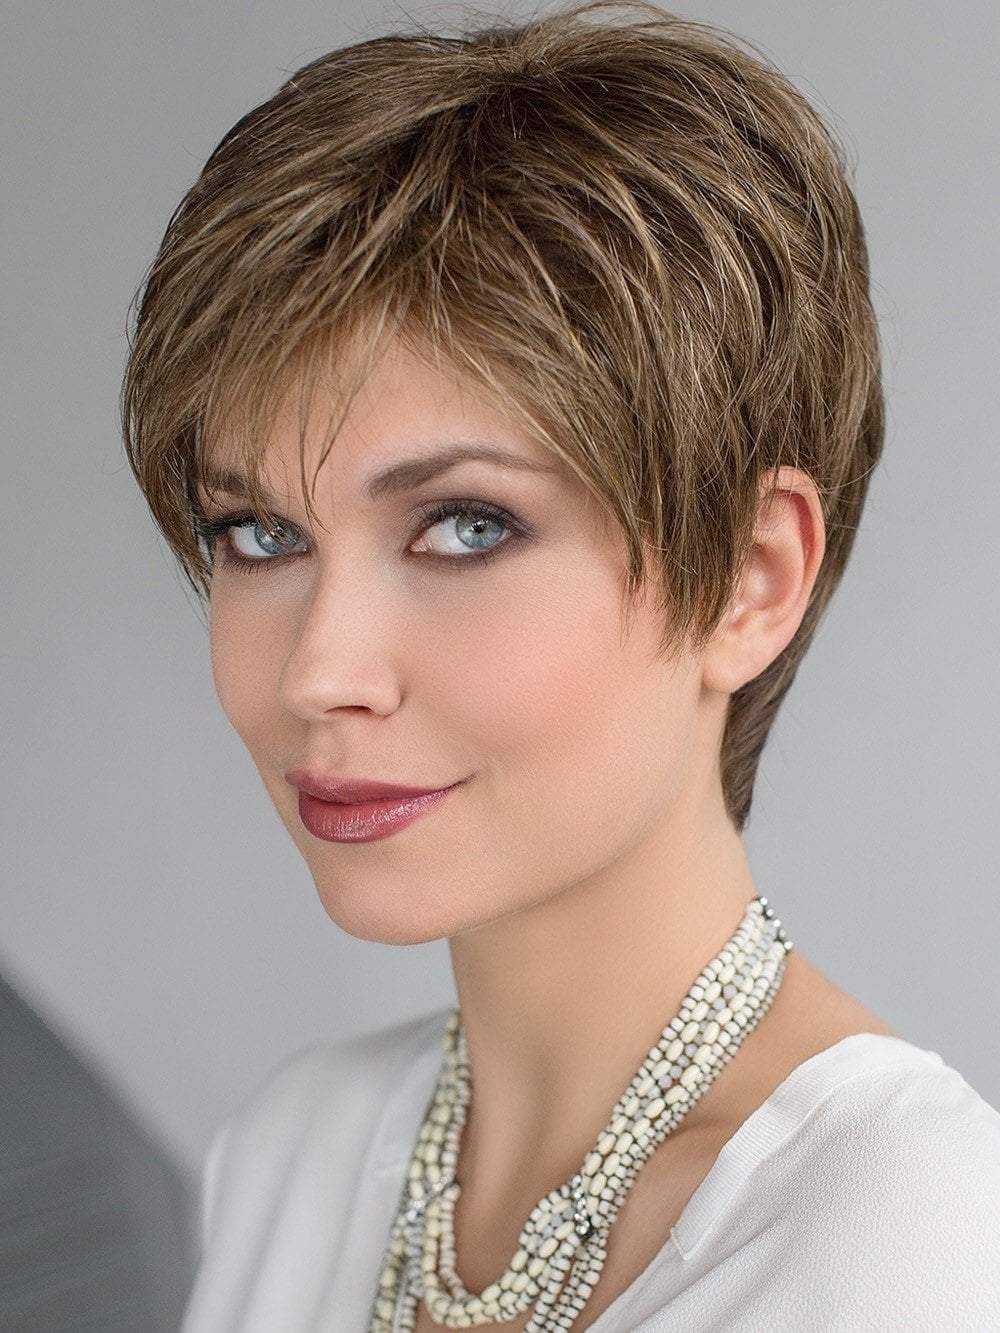 SELECT Wig by Ellen Wille in MOCCA MIX | Medium Brown, Light Brown, and Light Auburn blend